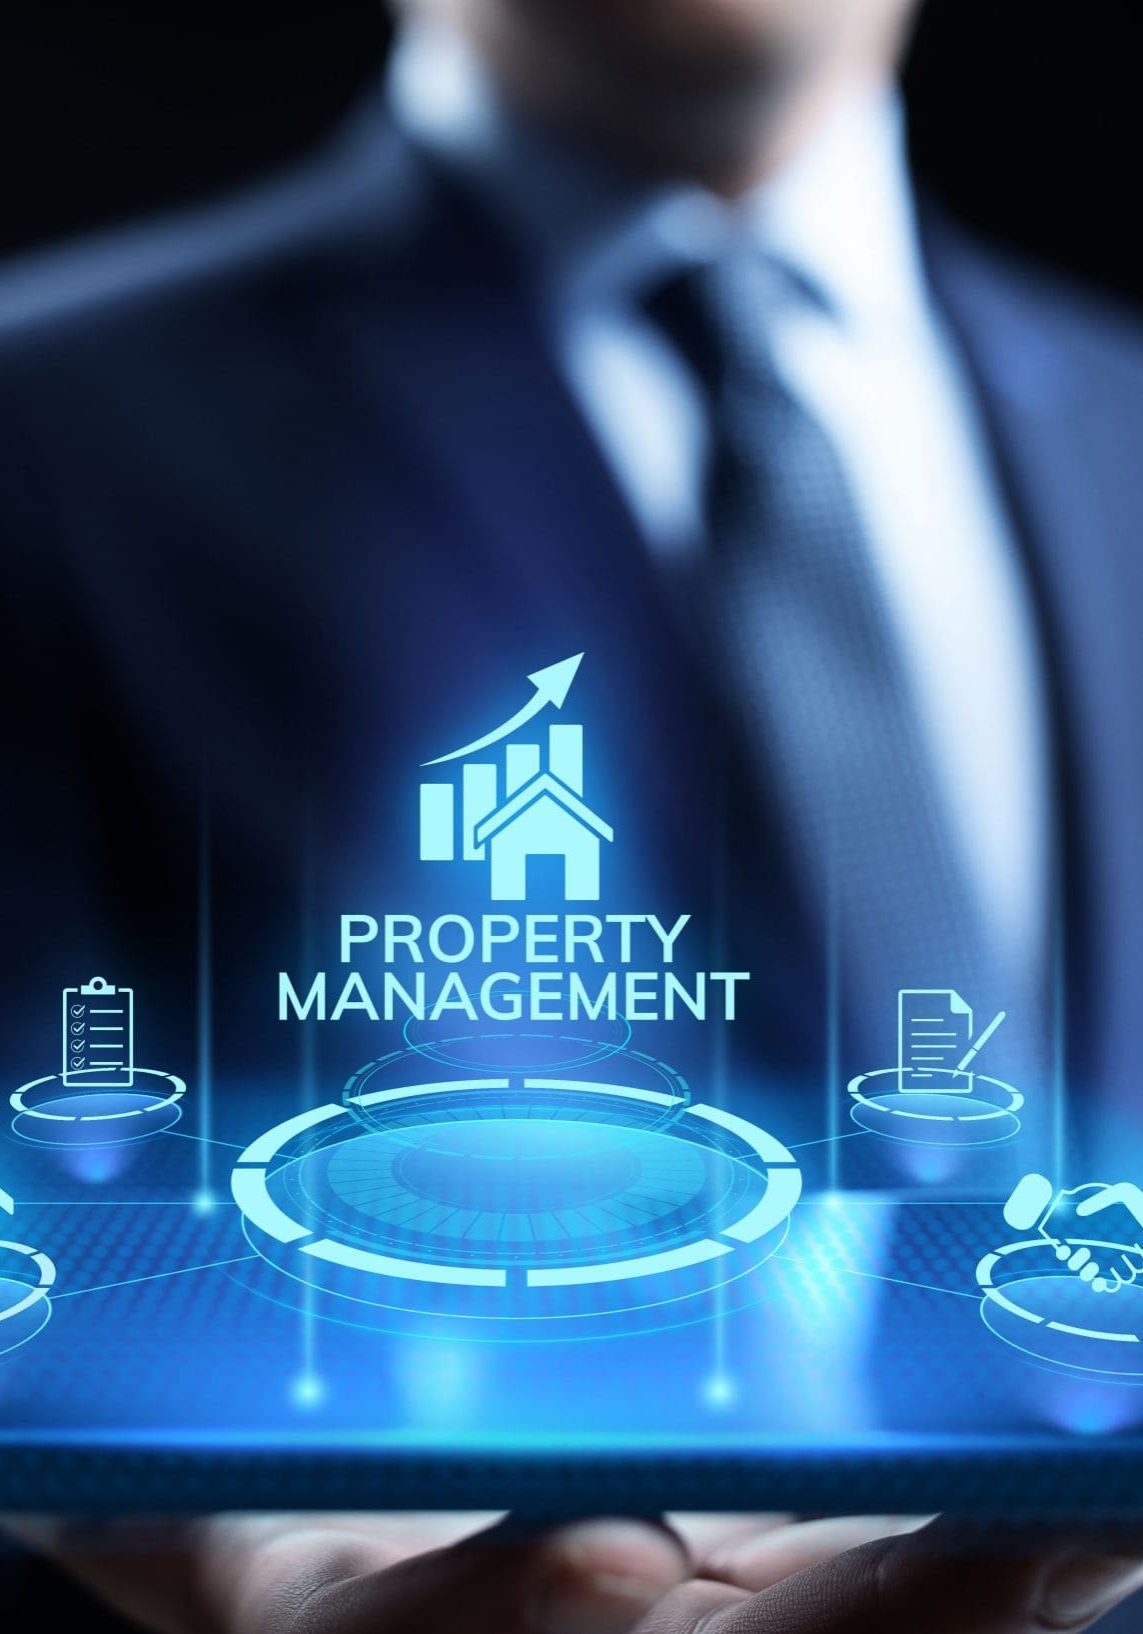 Property management Is the operation, control, and oversight of real estate. Business concept